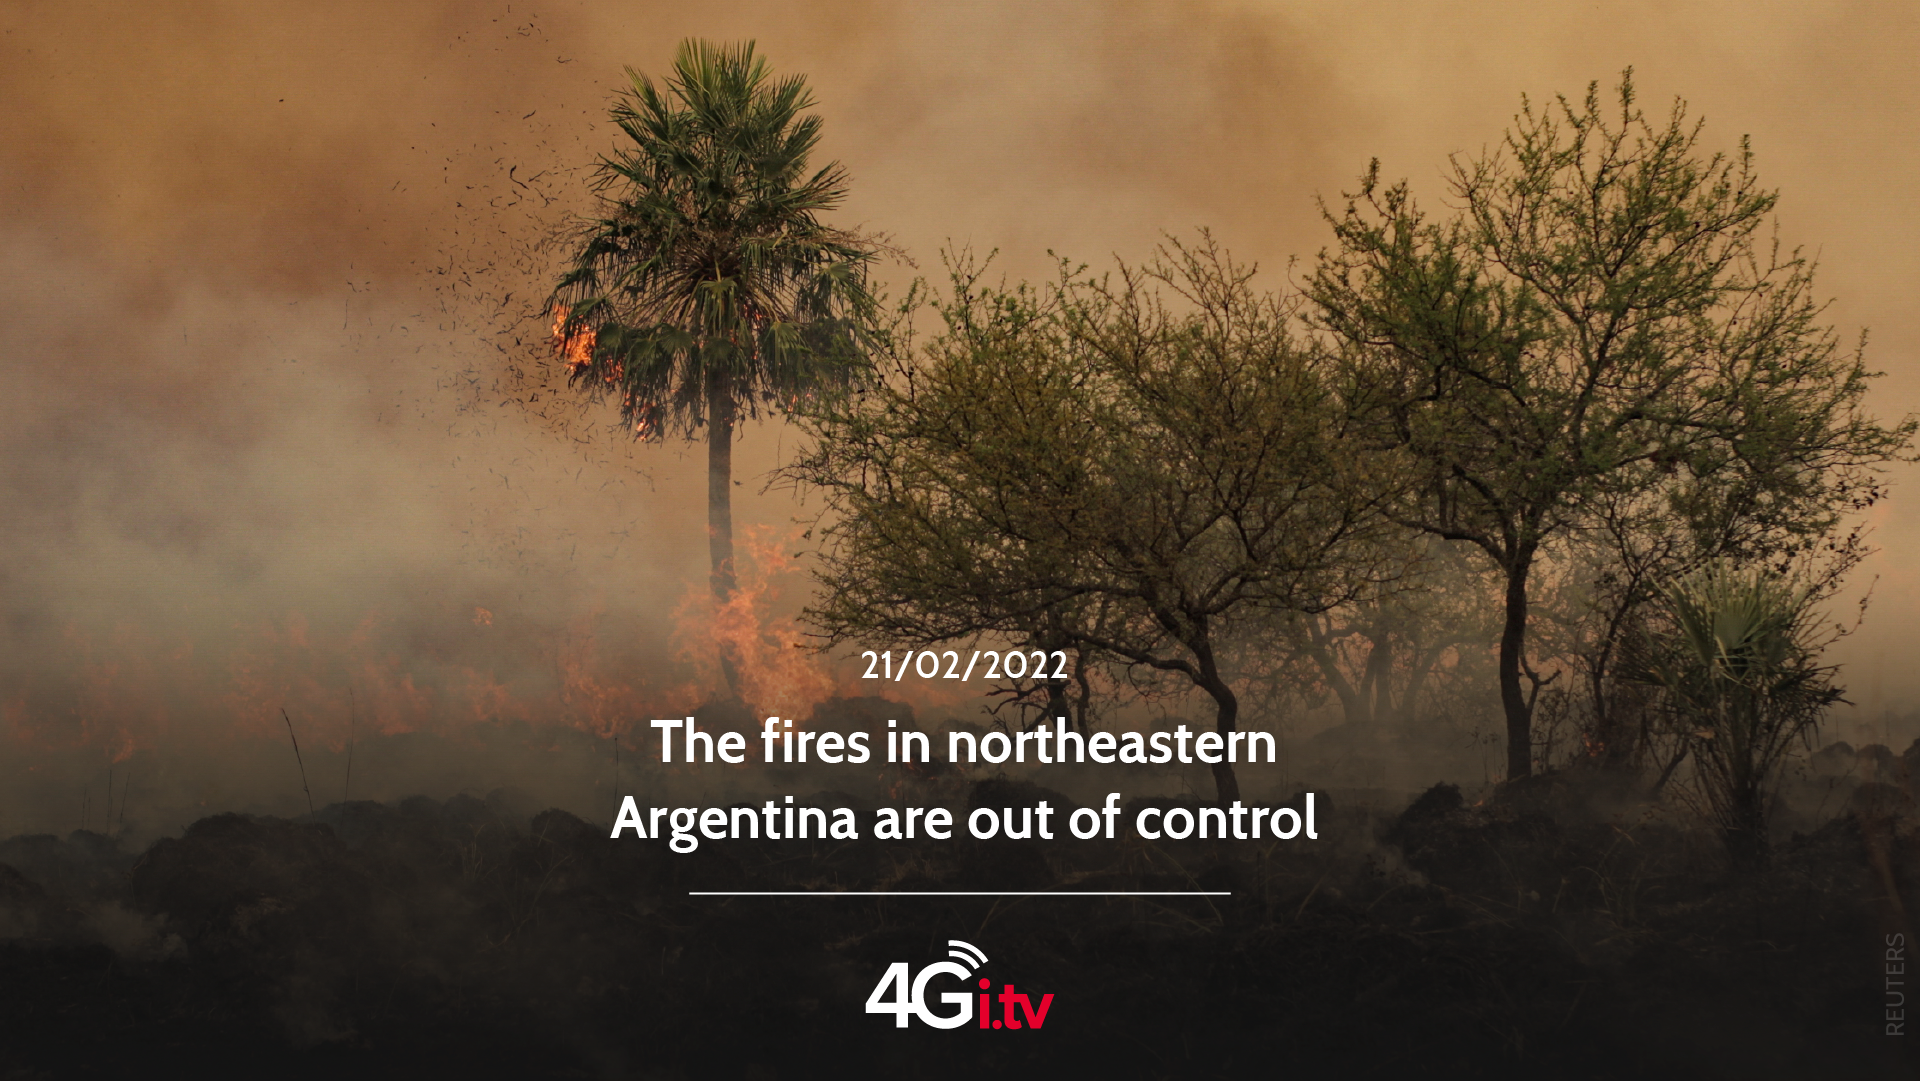 Подробнее о статье The fires in northeastern Argentina are out of control